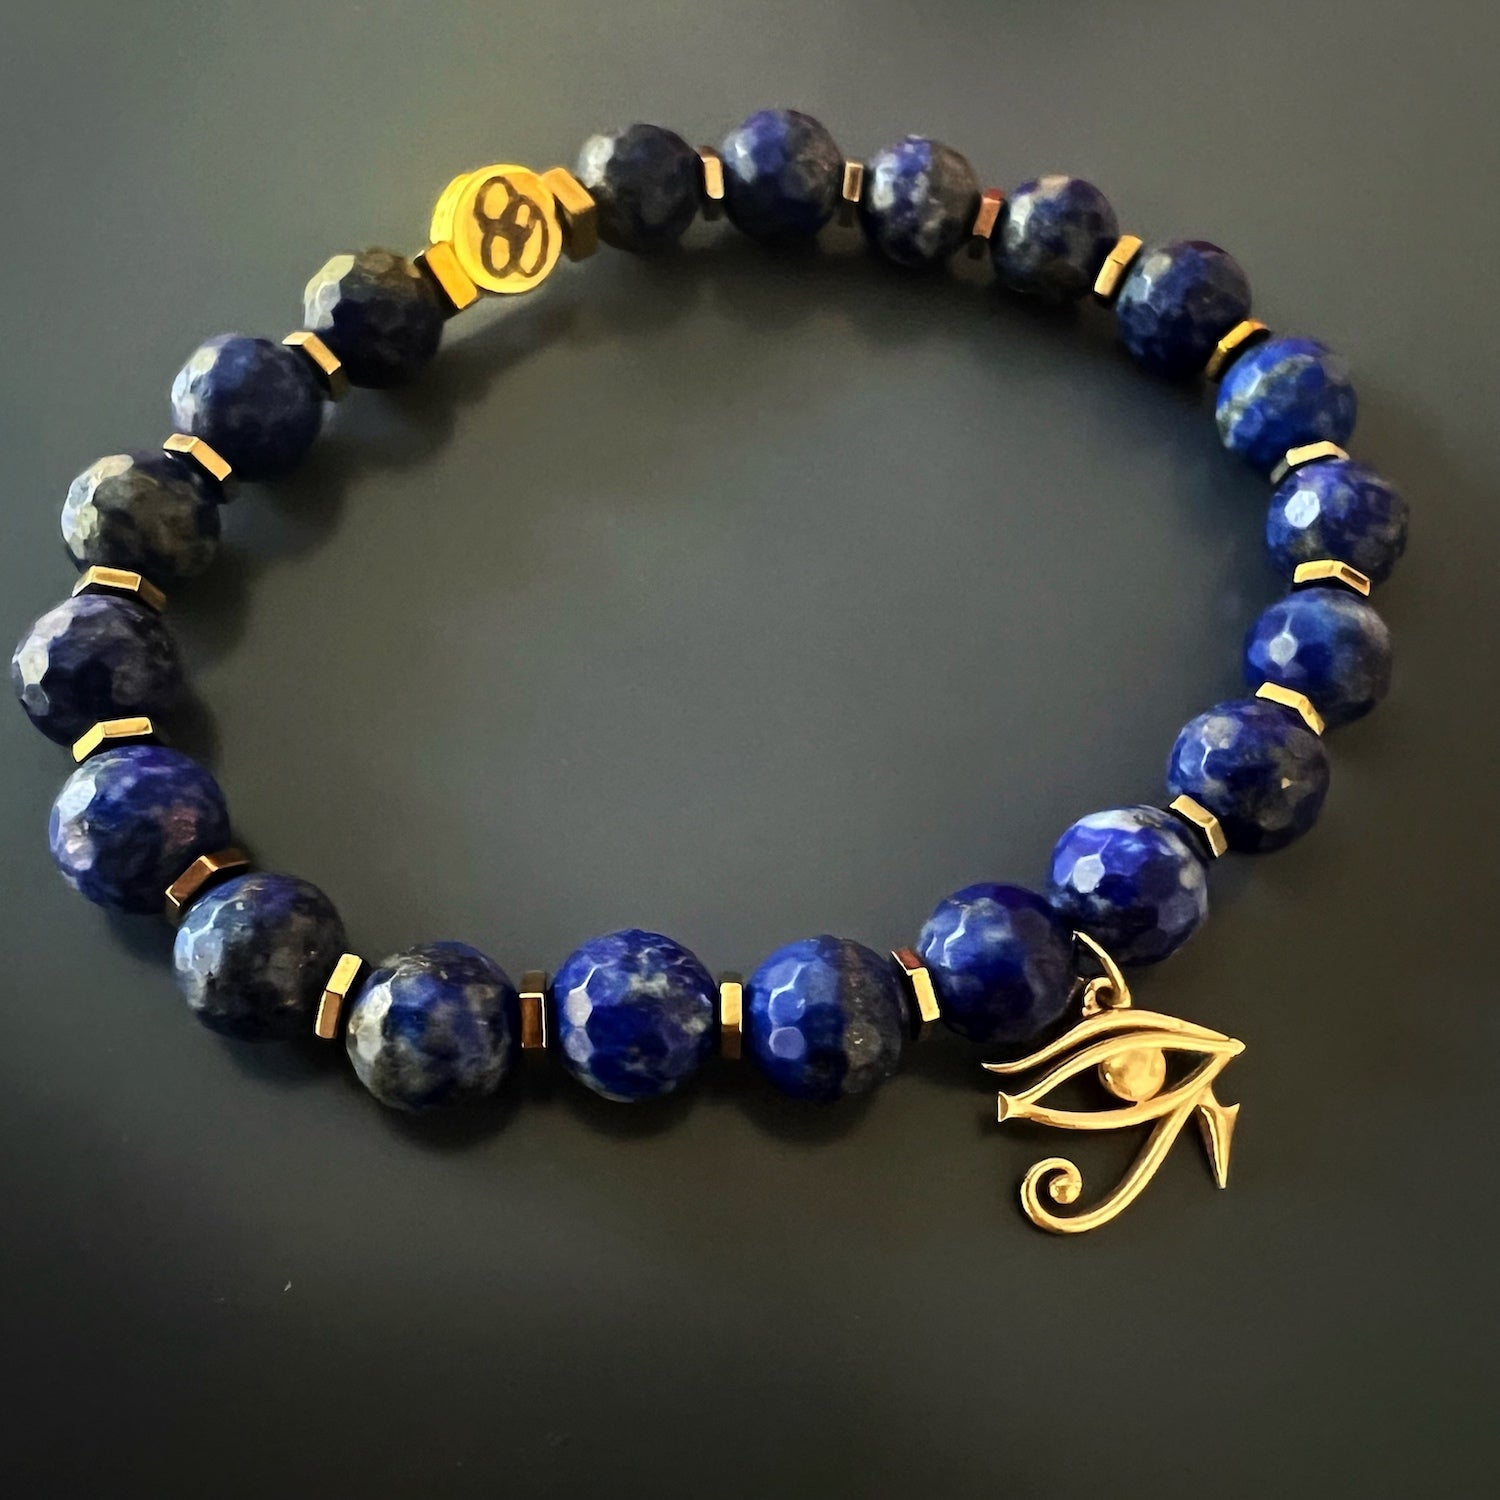 Discover the profound beauty and symbolism of the Solid Gold Eye of Ra Spiritual Beaded Bracelet, designed to connect you with protection, clarity, and divine insight.